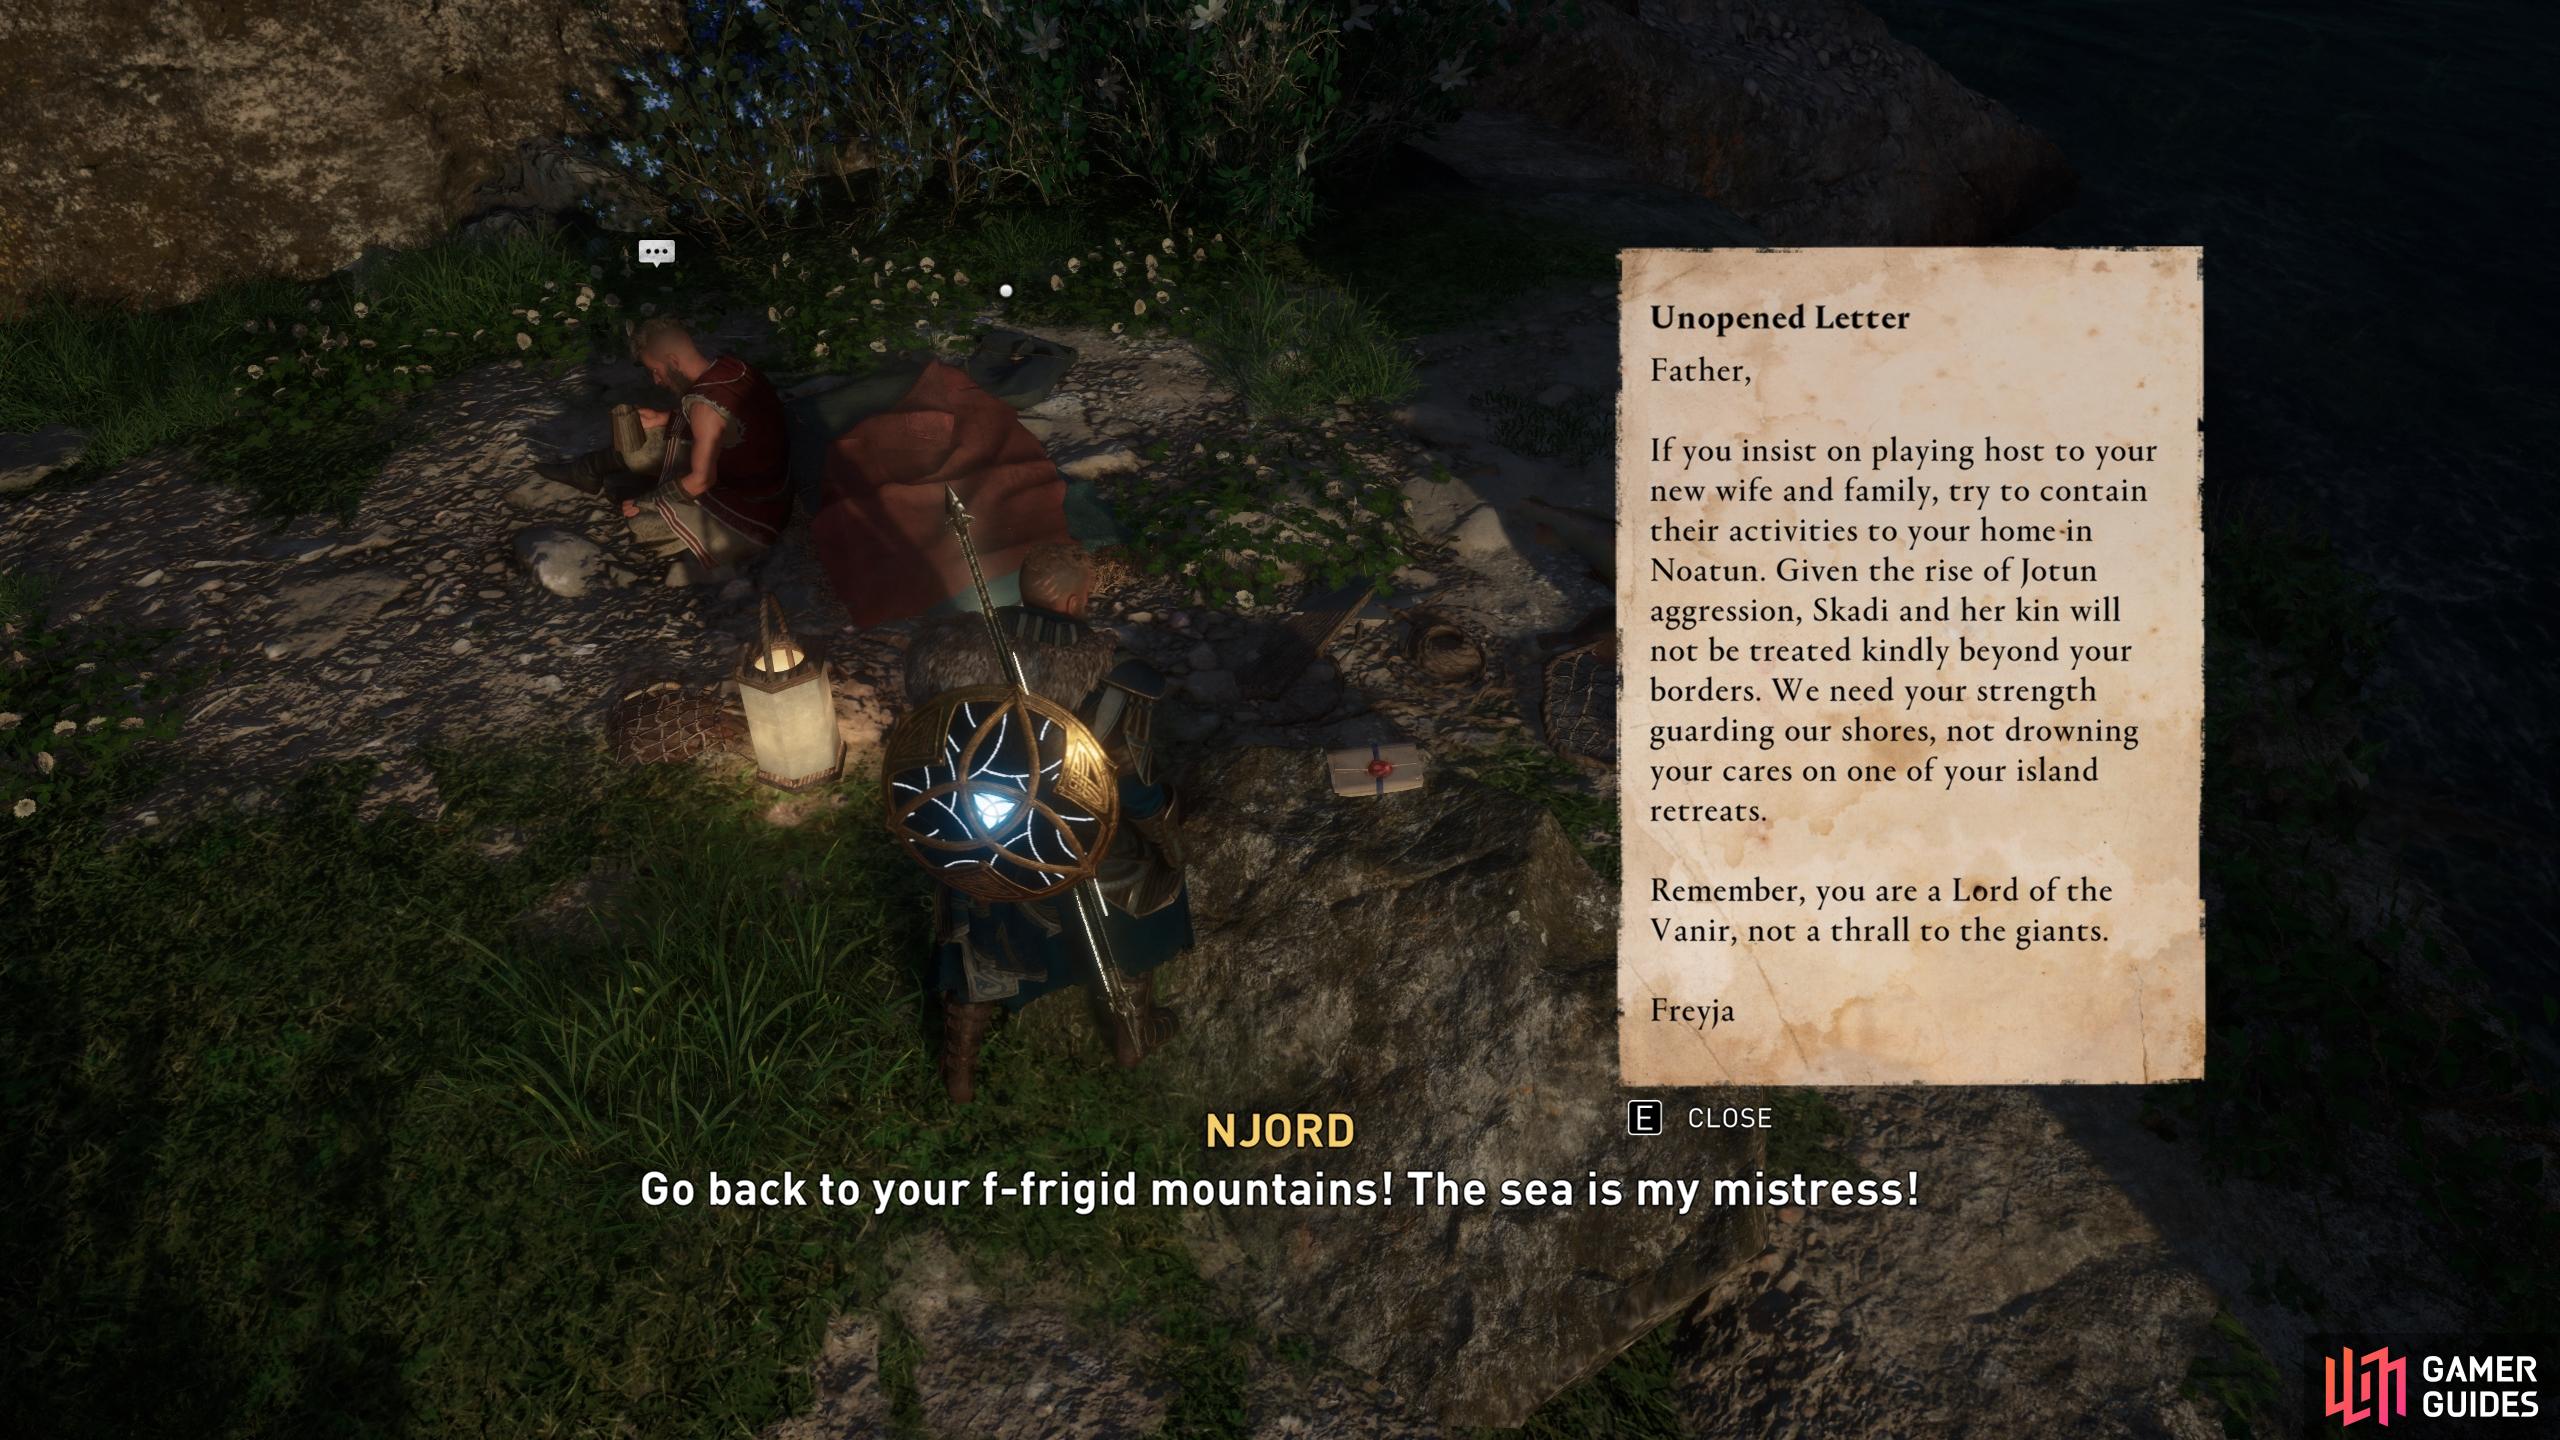 Be sure to read the note next to Njord for some context about his predicament.